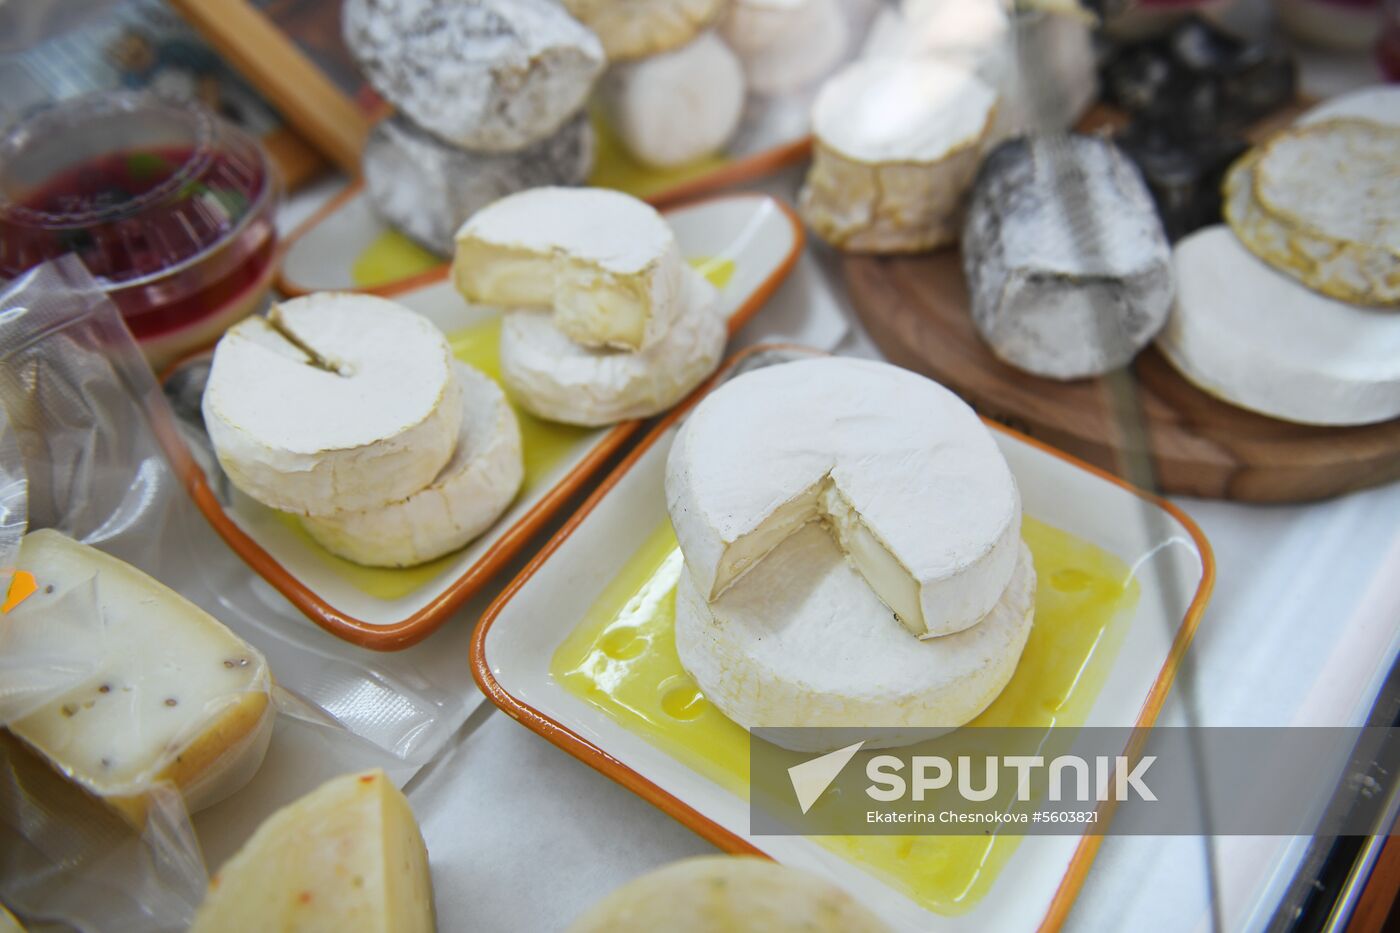 Russian Cheese Festival at VDNKh